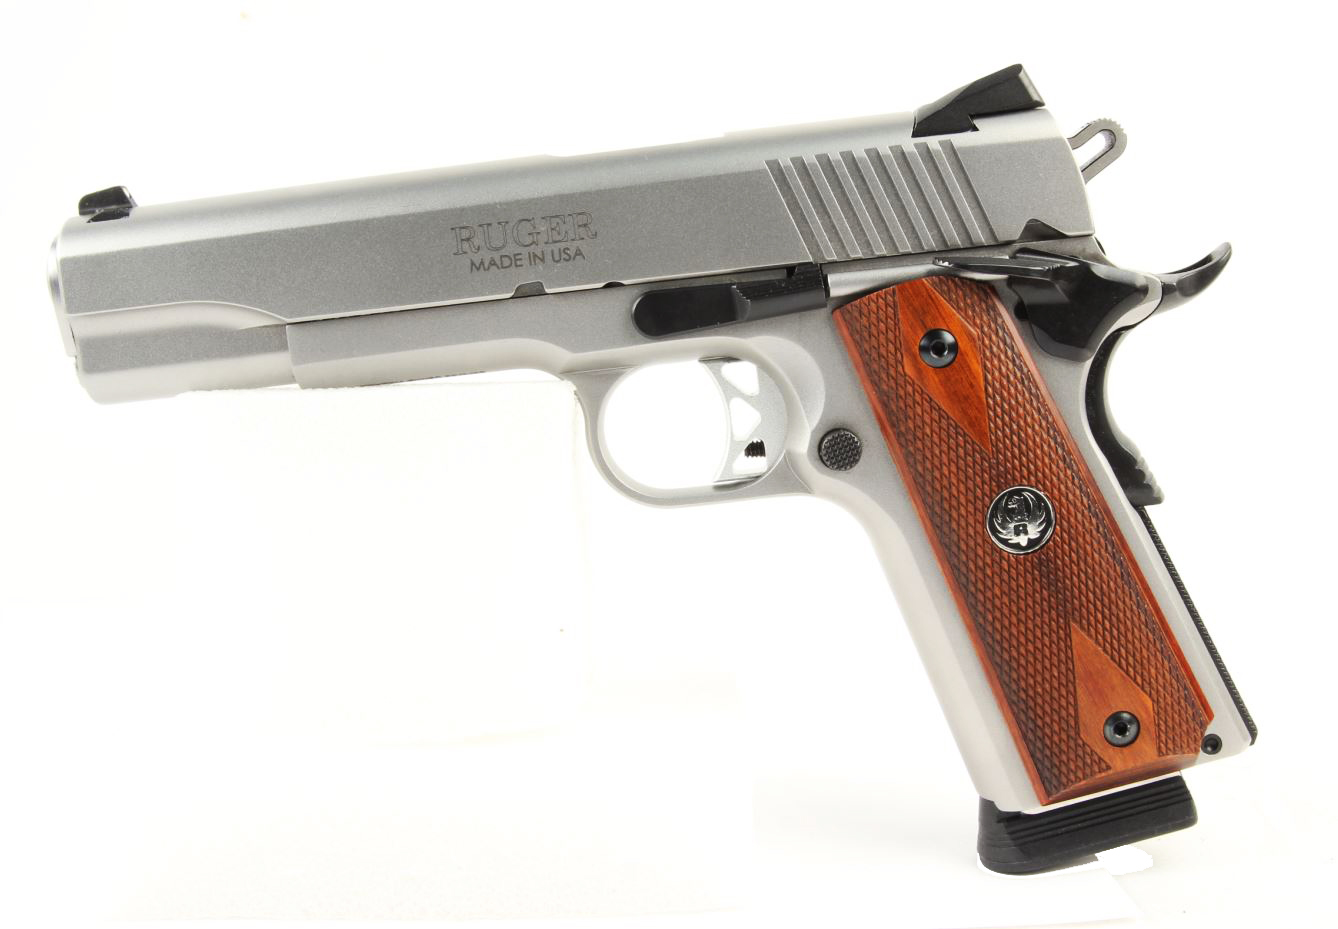 USED Ruger SR1911, 45acp